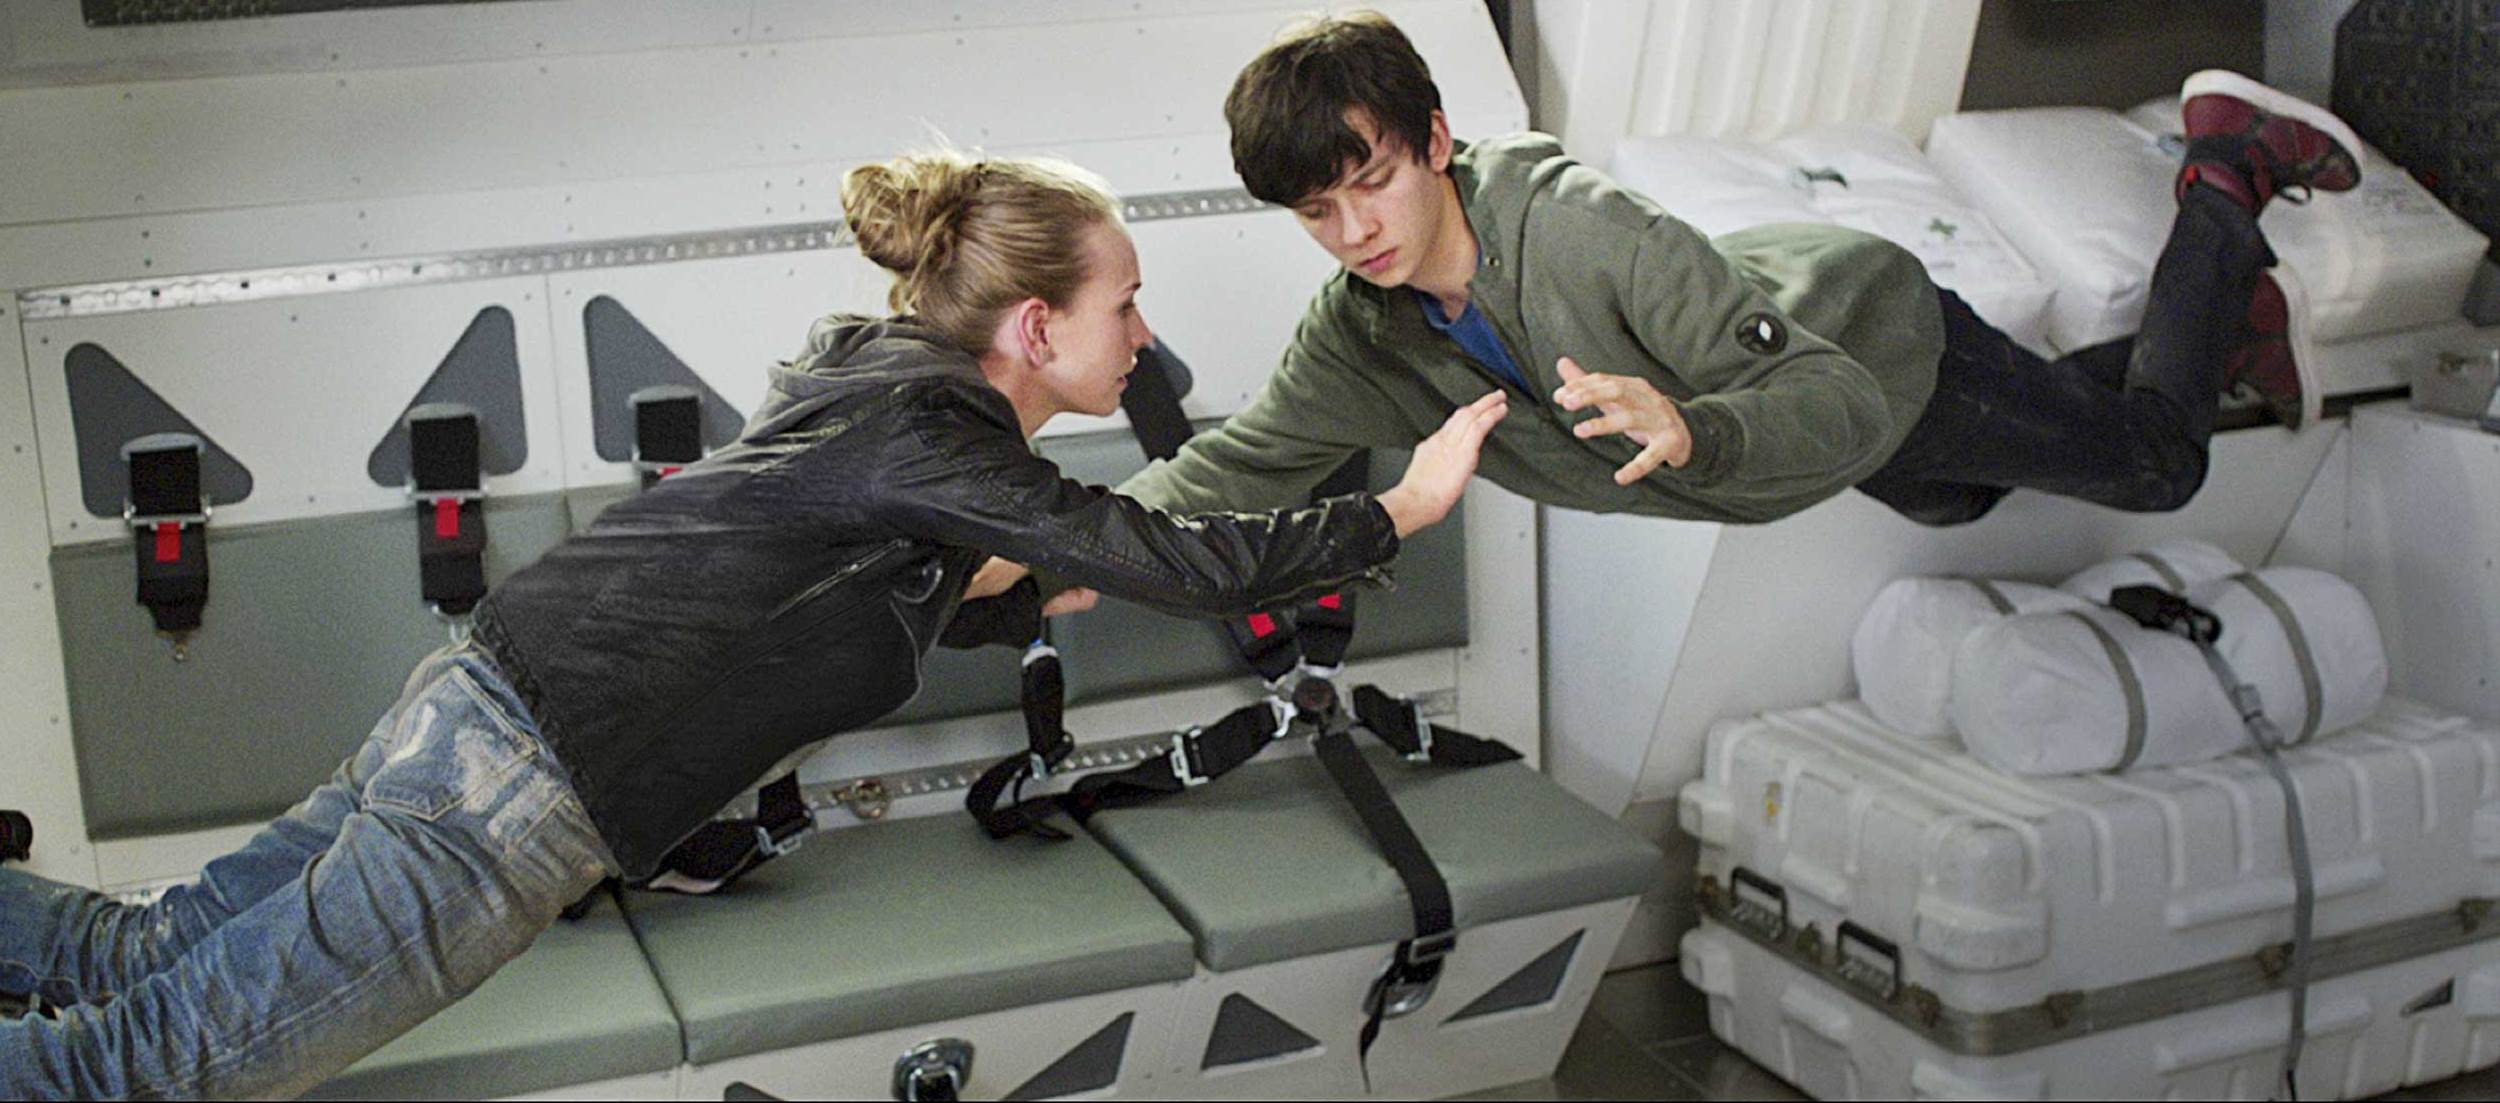 Romance in zero g - Britt Robertson and Asa Butterfield in The Space Between Us (2017)